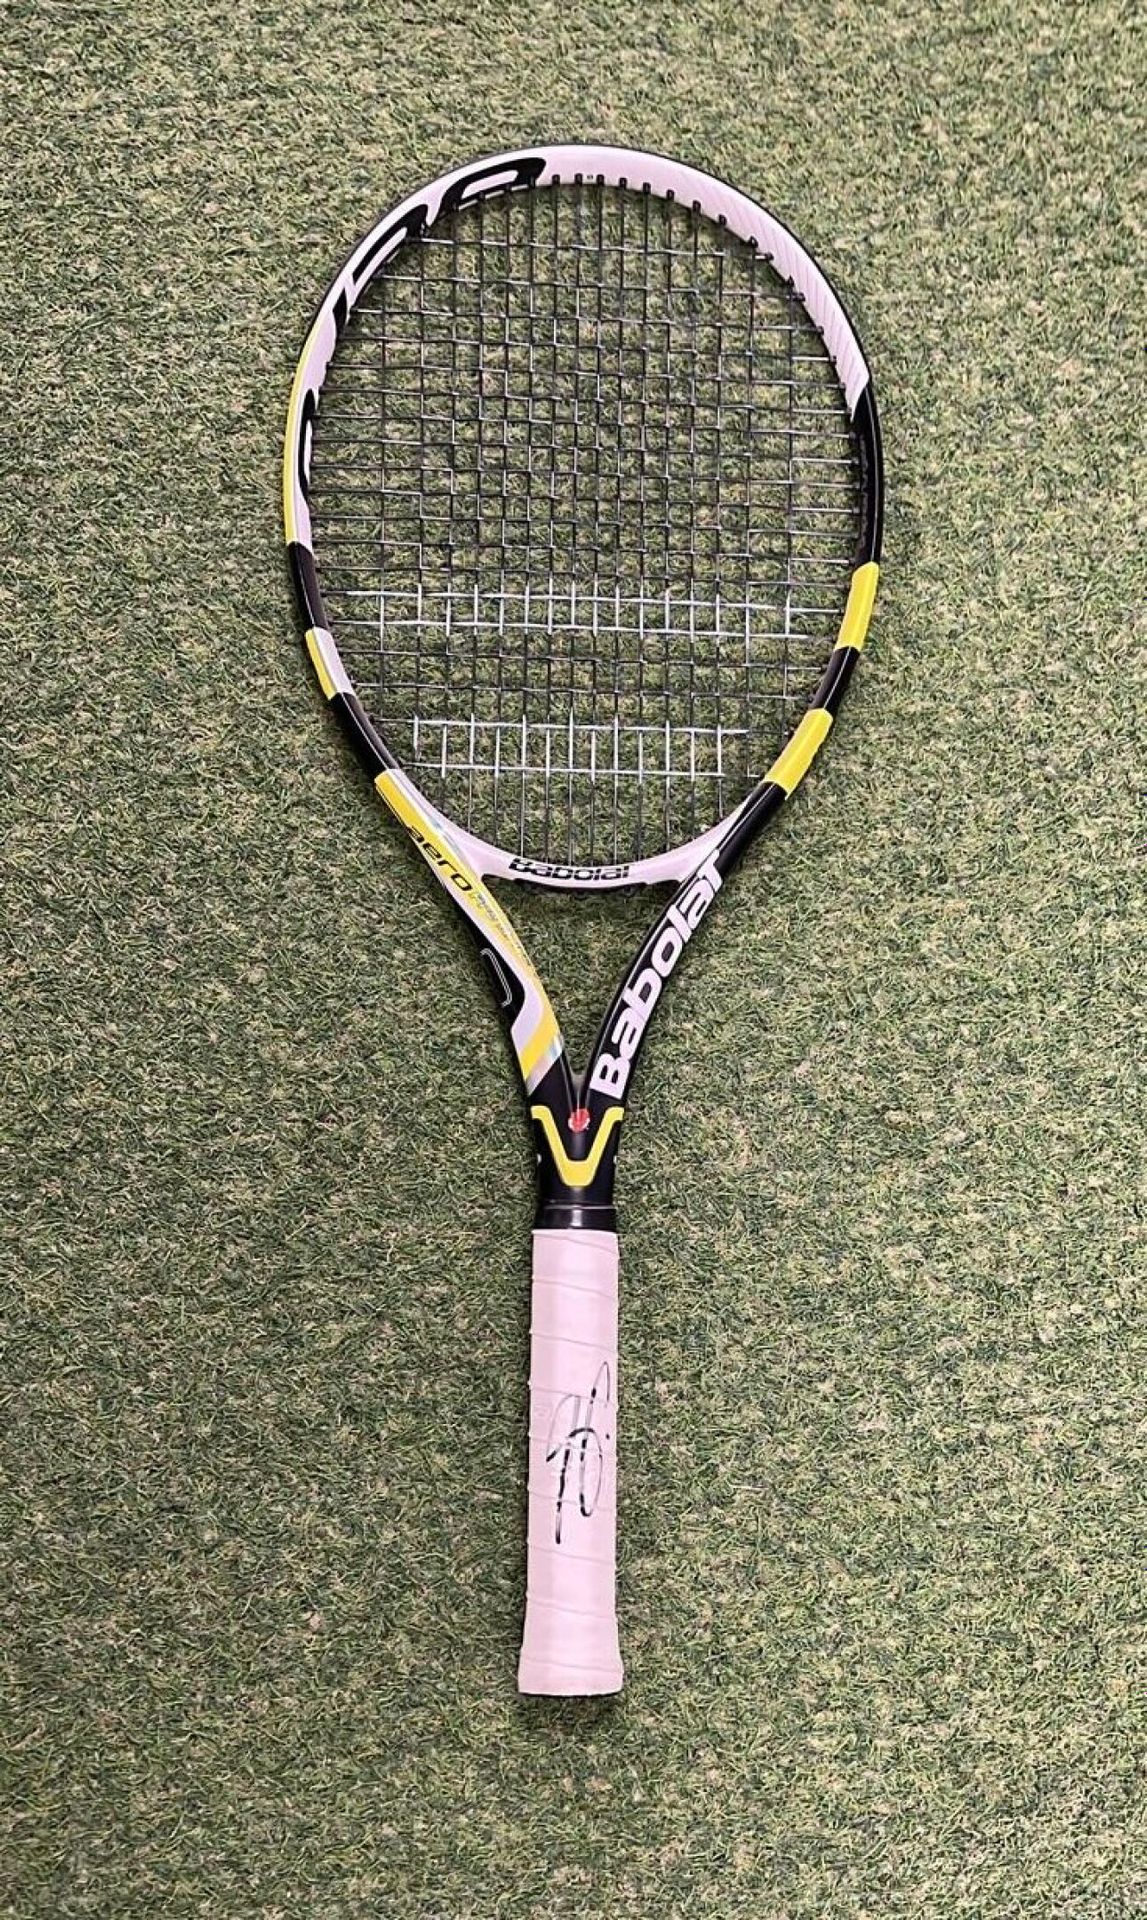 Null Babolat match racket signed by Jo-Wilfried Tsonga, 2019

Note:
- Official B&hellip;